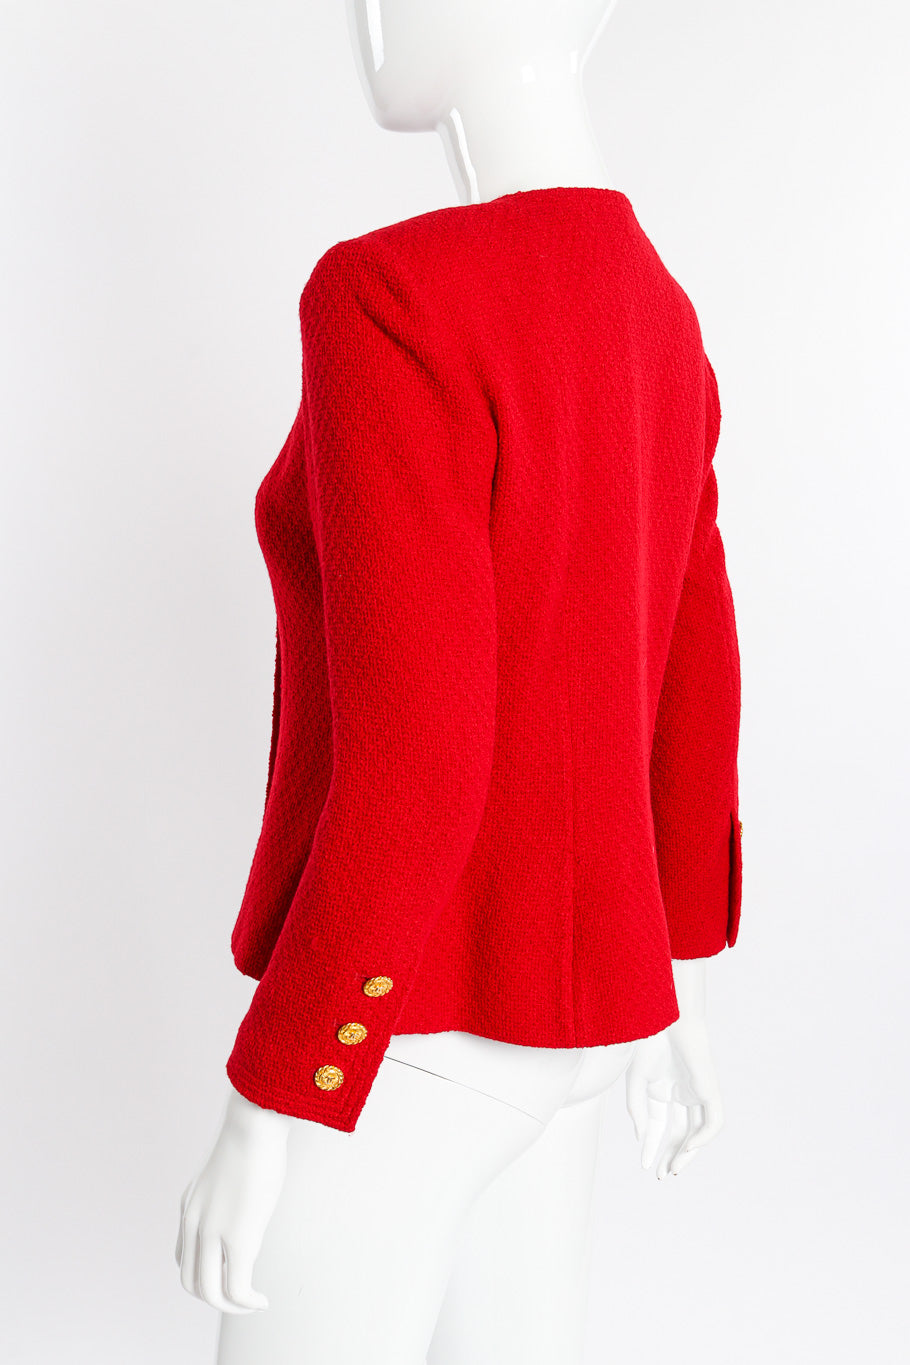 Vintage Chanel Collarless Double Breasted Jacket back view on mannequin closeup @recessla